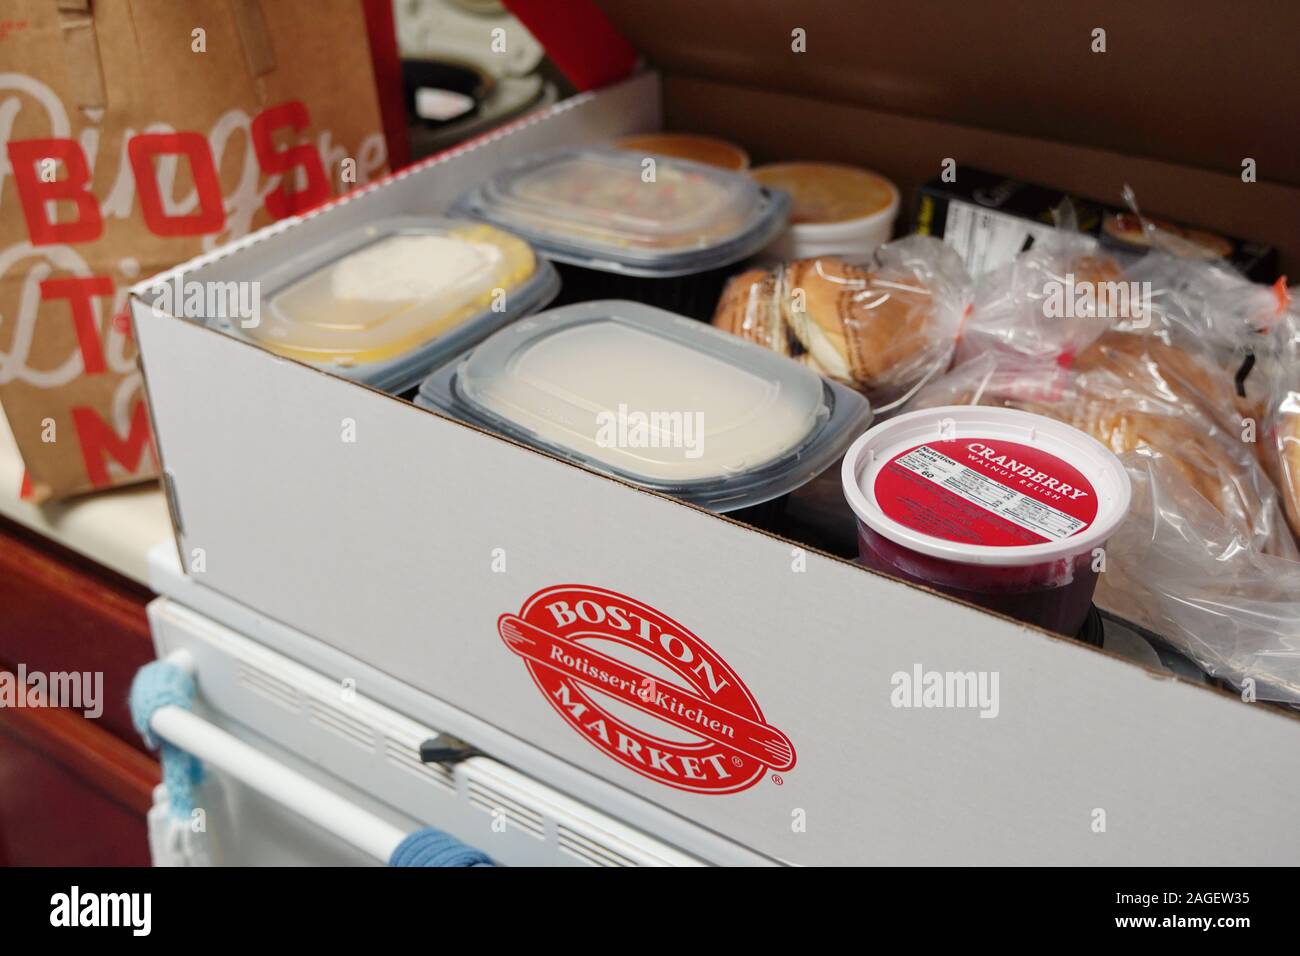 Middletown, CT / USA - November 27, 2019: Holiday catering meal kit made by Boston Market ready to be heated then served Stock Photo